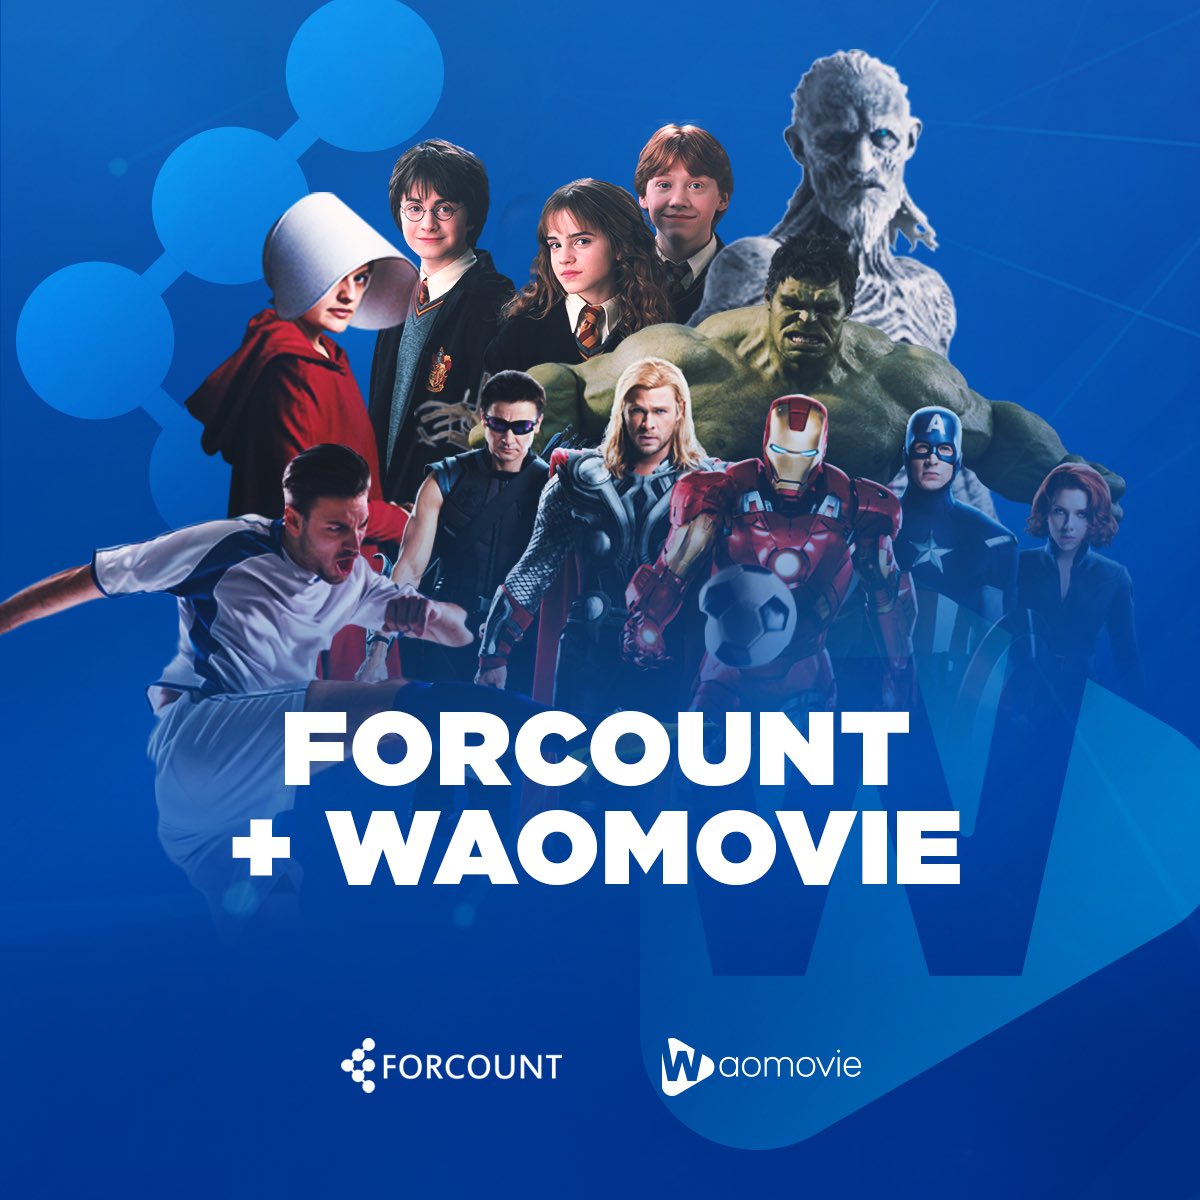 Forcount (@forcountnews) / Twitter